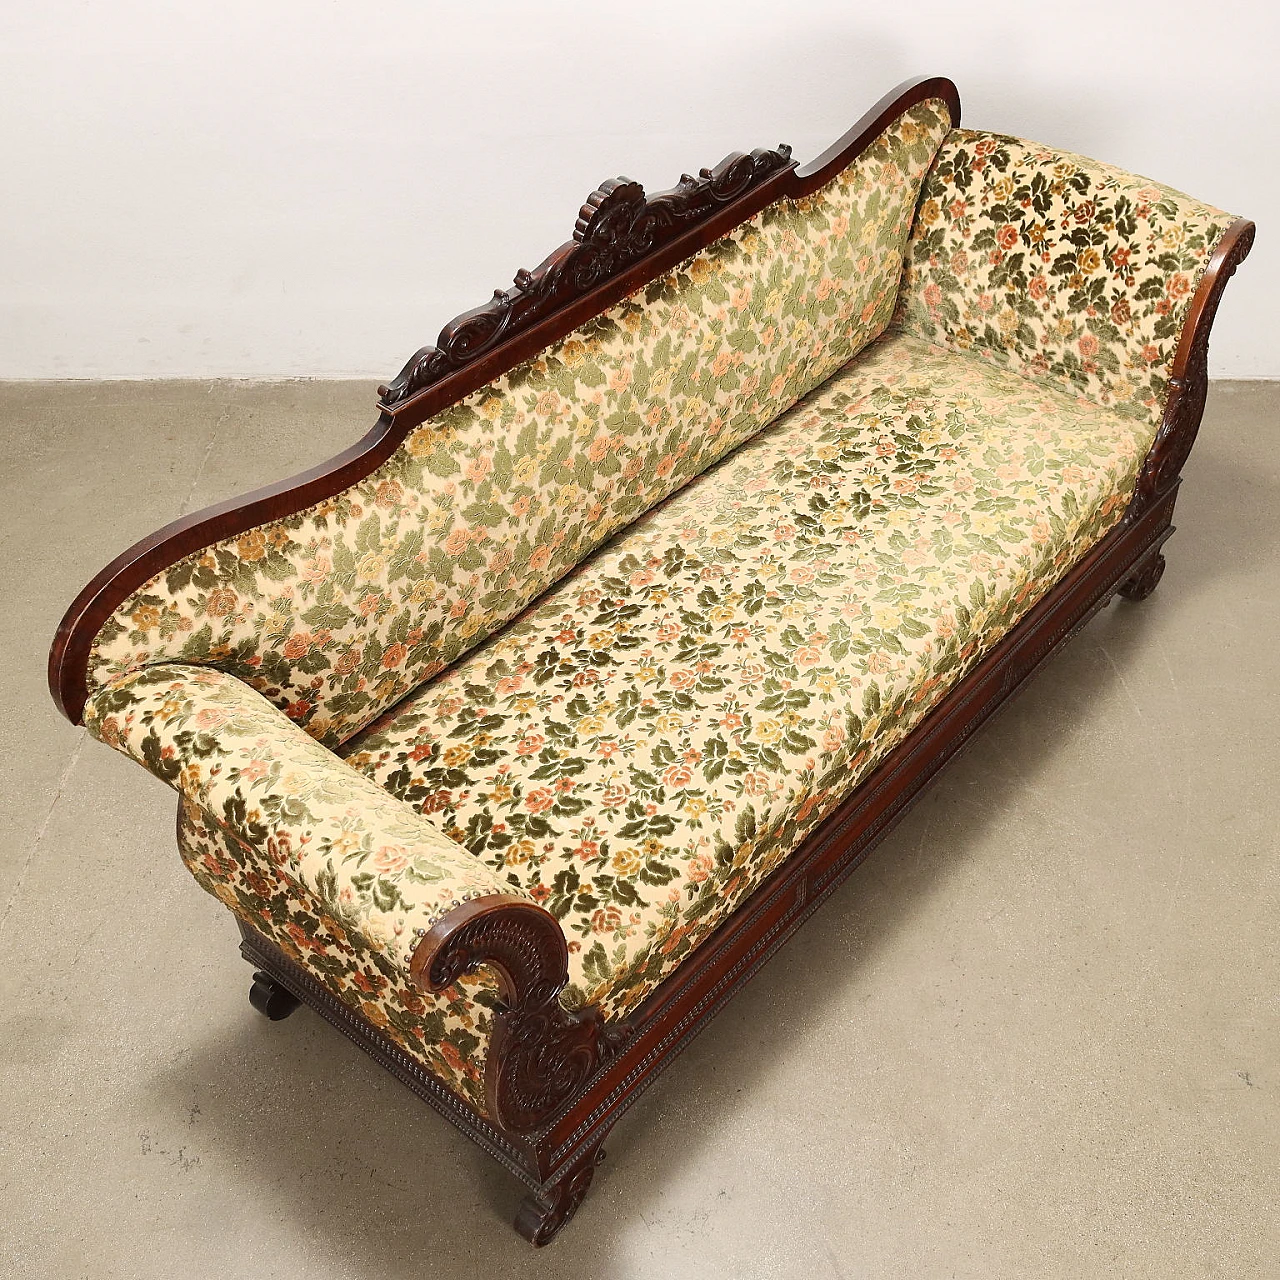 Mahogany sofa with carved leaf motifs and floral fabric, 19th century 8